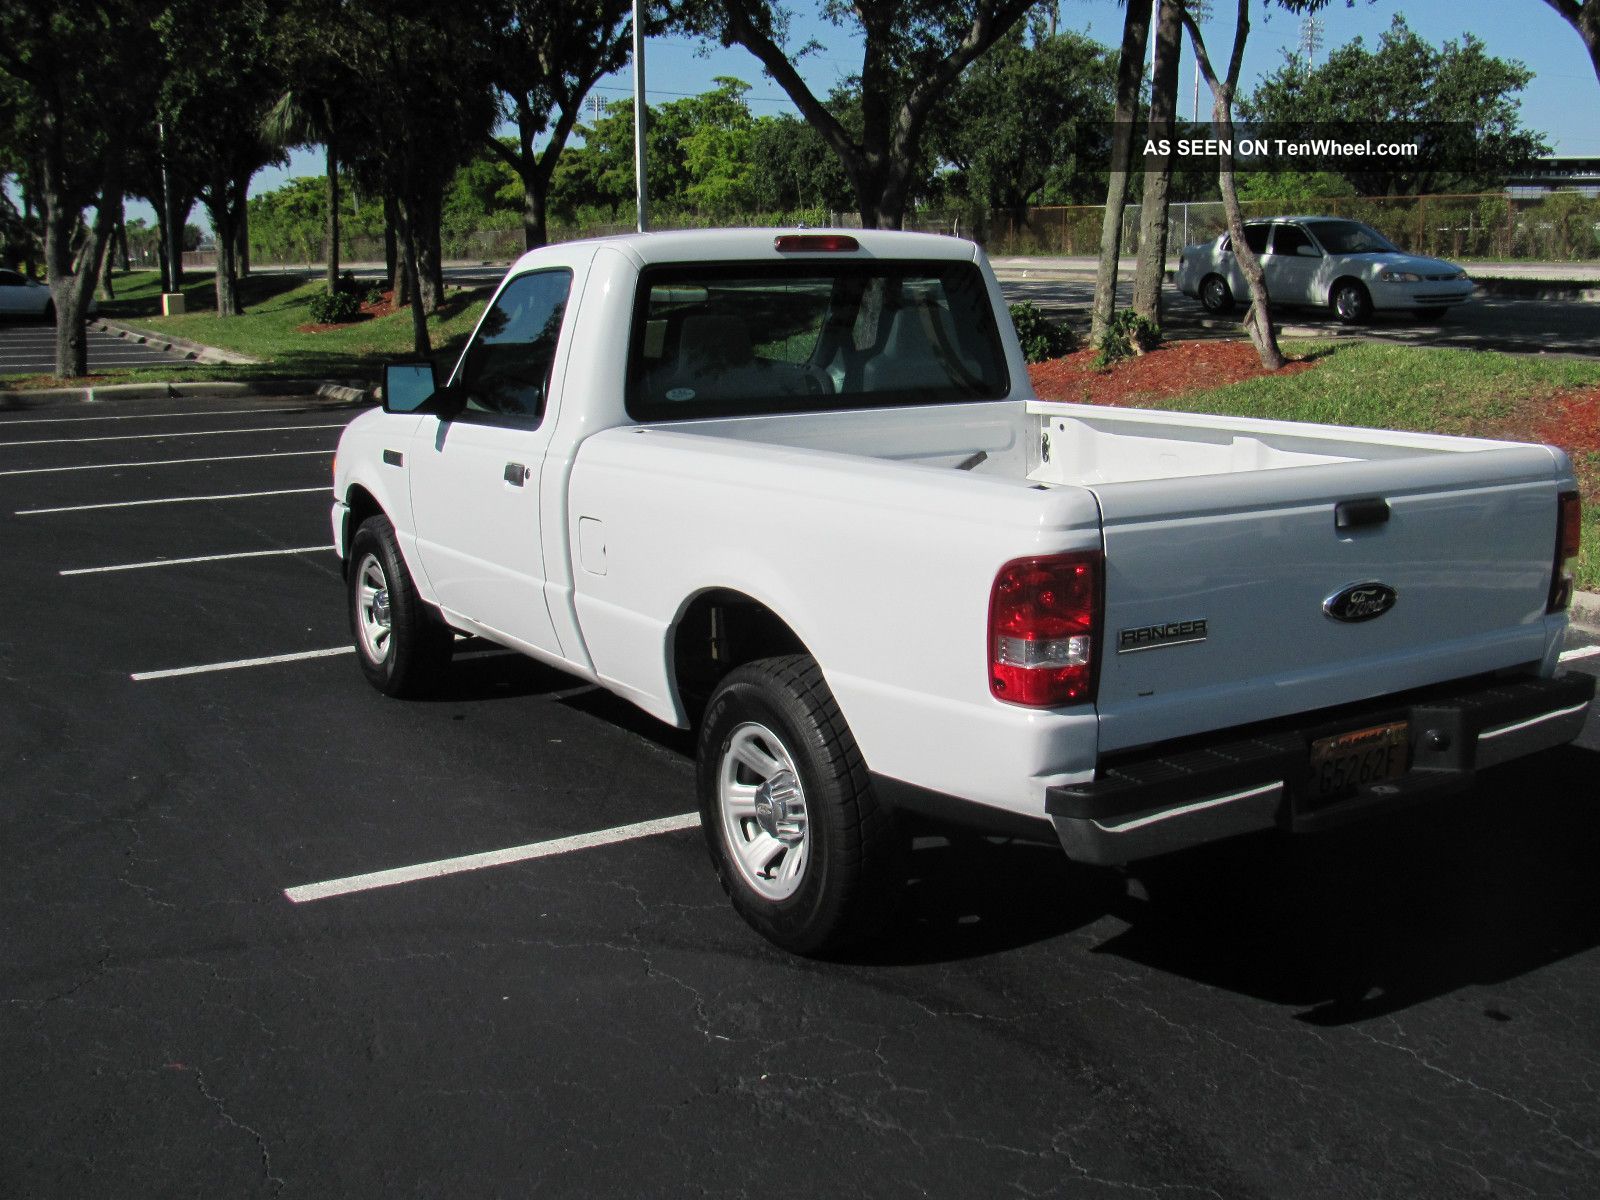 2007 Ford ranger bj xl crew cab review